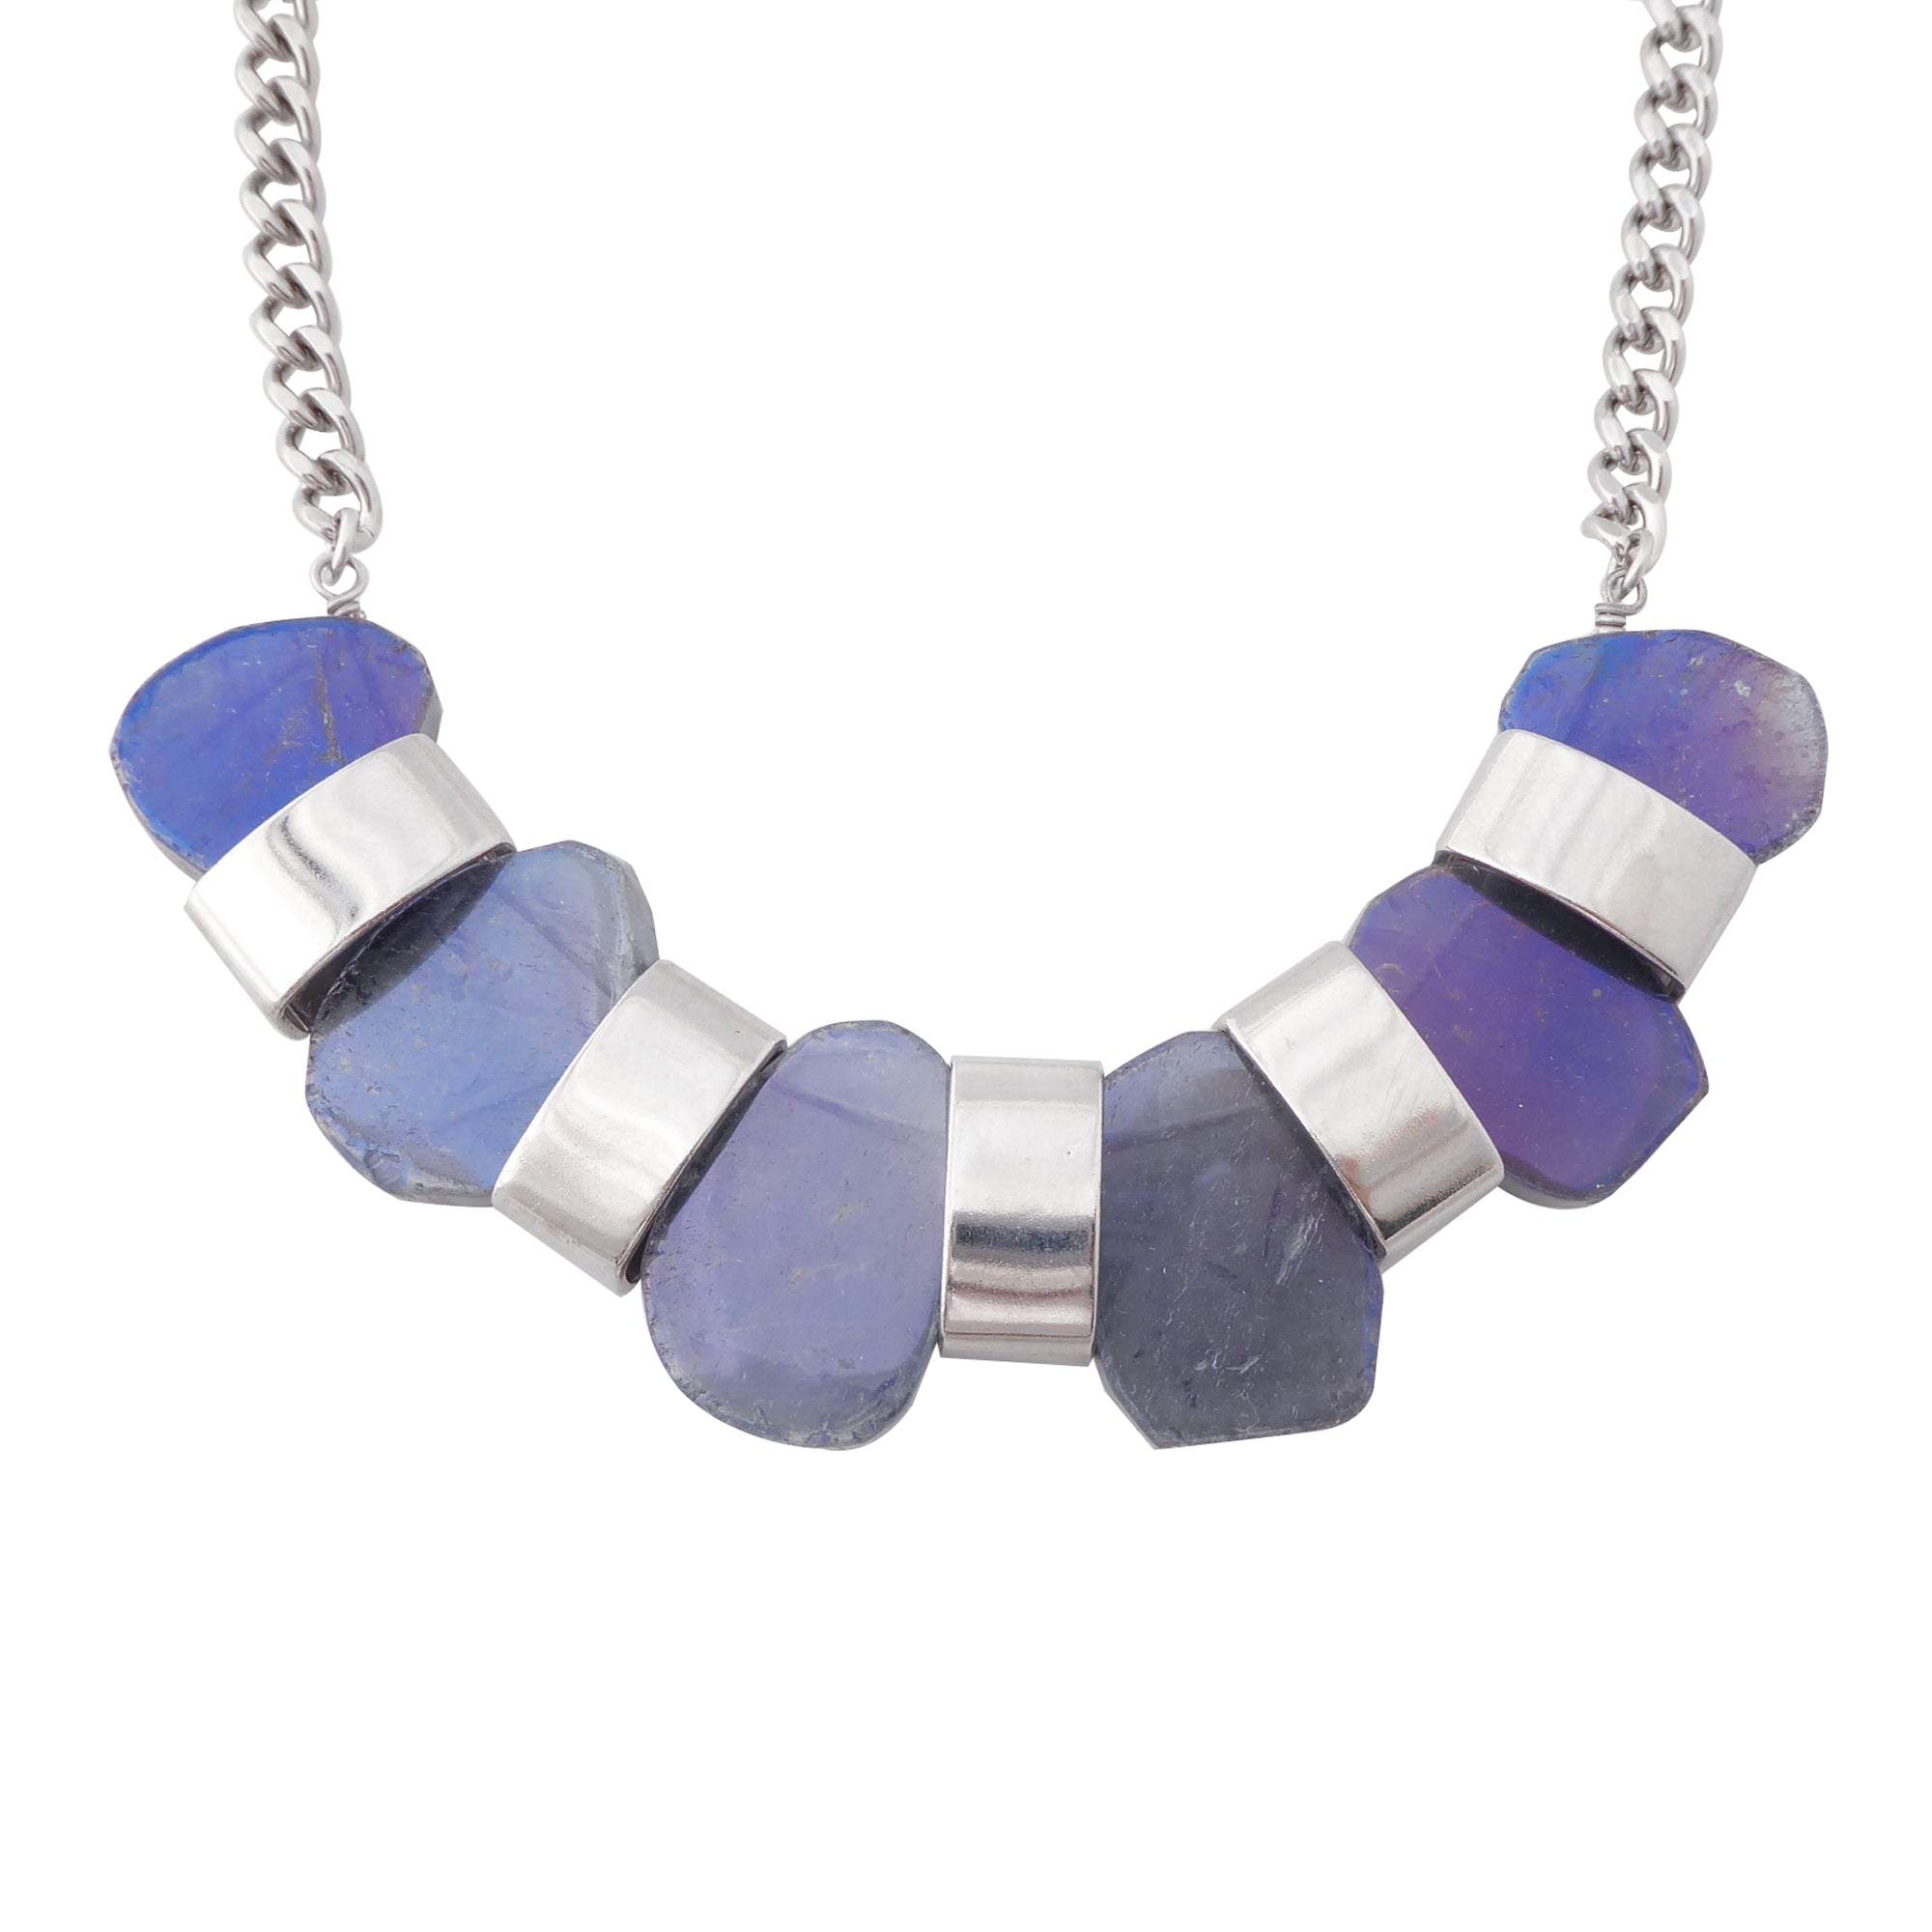 Iridescent blue agate necklace by Jenny Dayco 1